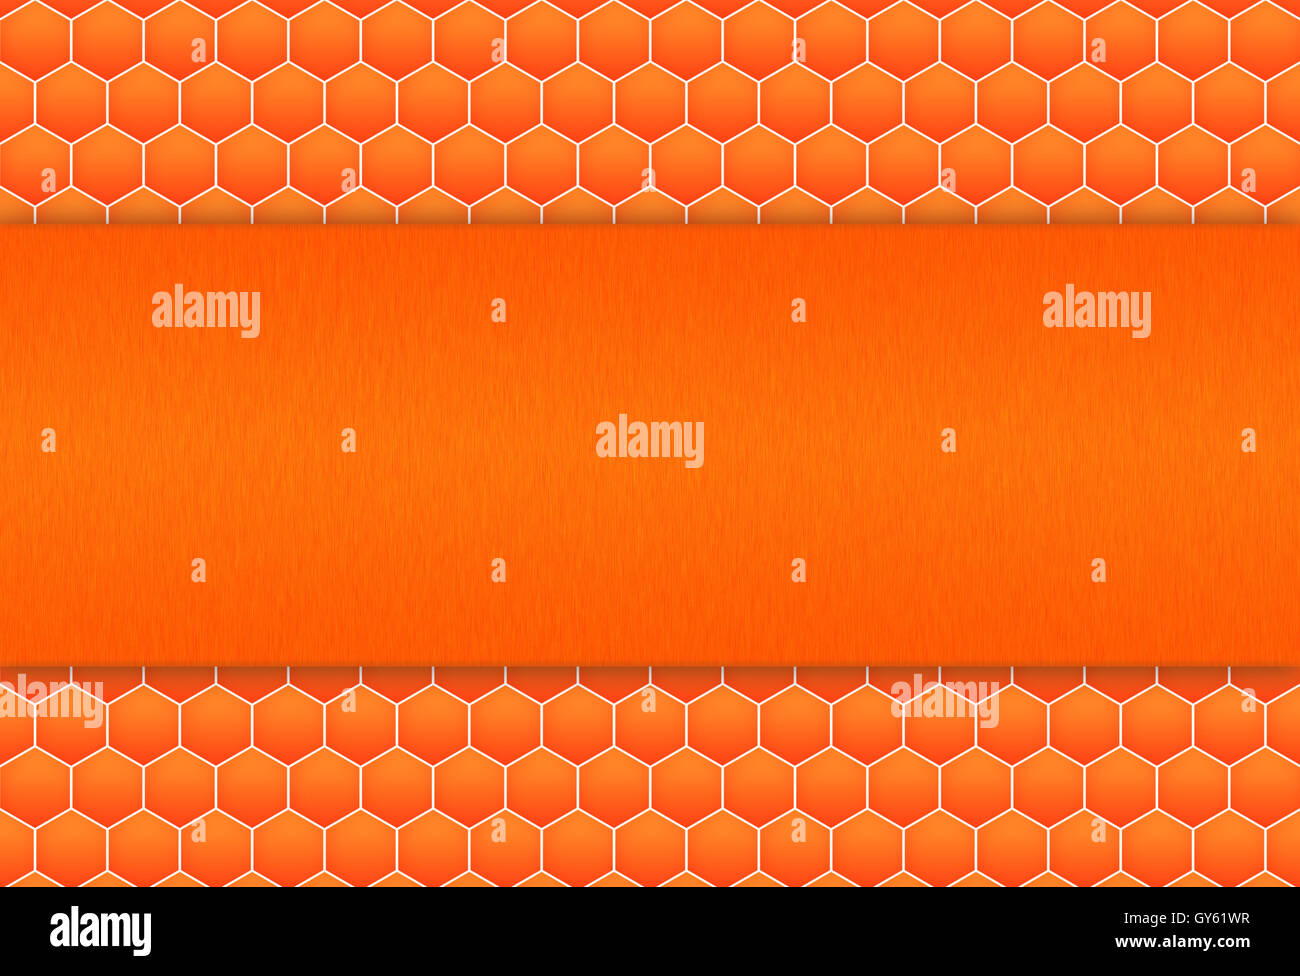 honeycomb pattern background for web design. Stock Photo